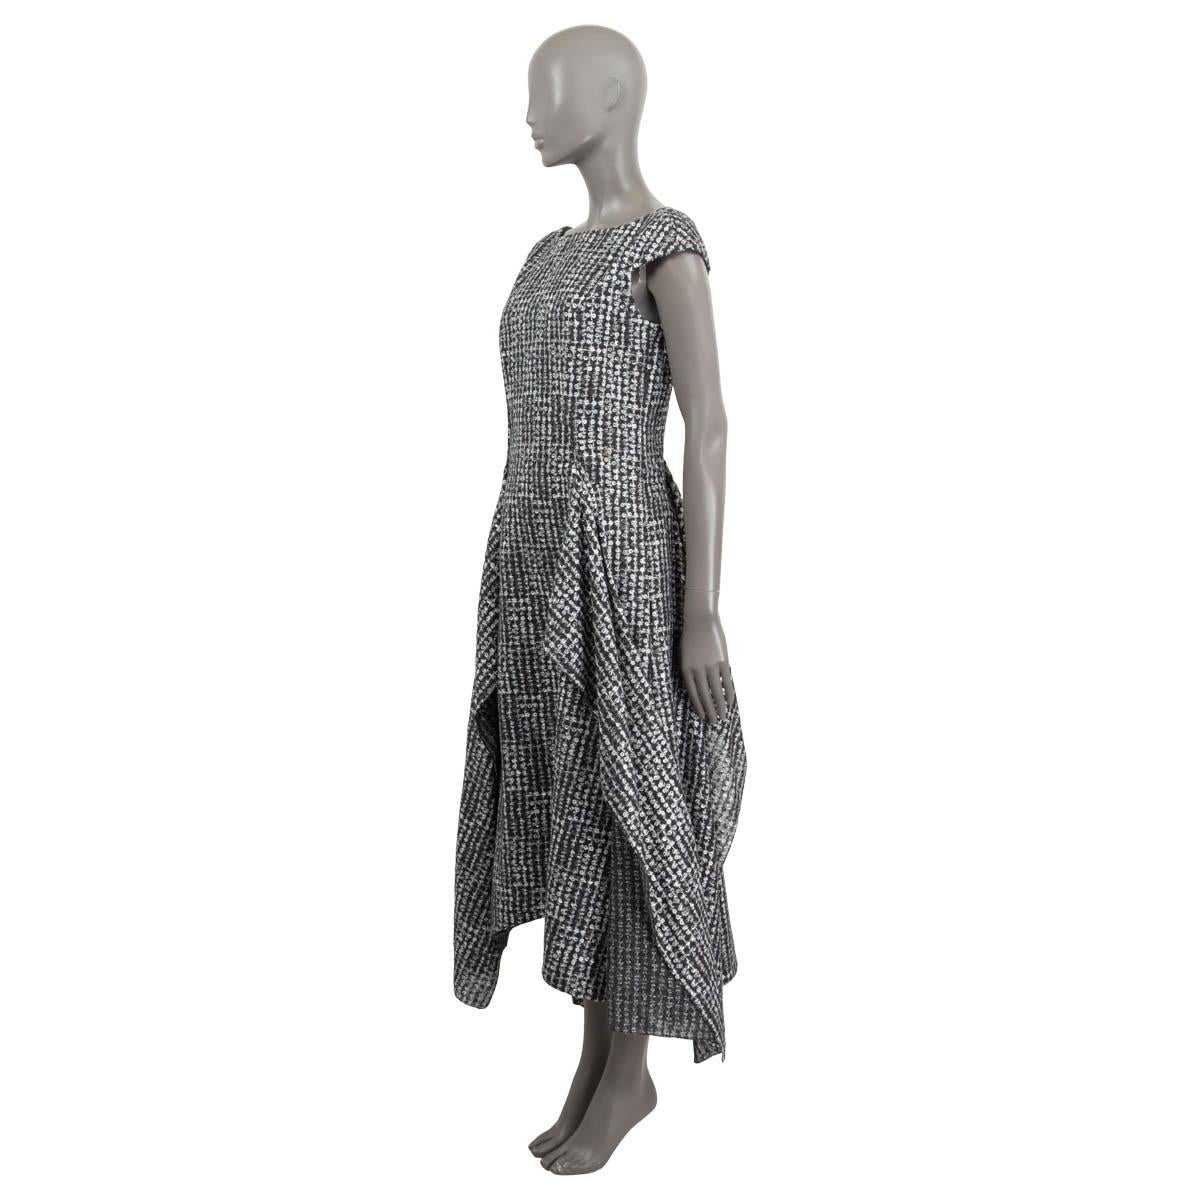 100% authentic Chanel sequin embellished asymmetrical midi dress in silver and charcoal linen (52%), polyester (37%), cotton (7%) and polyamide (4%). Features cap sleeves and a silver 'CC' emblem at the front. Opens with a zipper and a hook at the